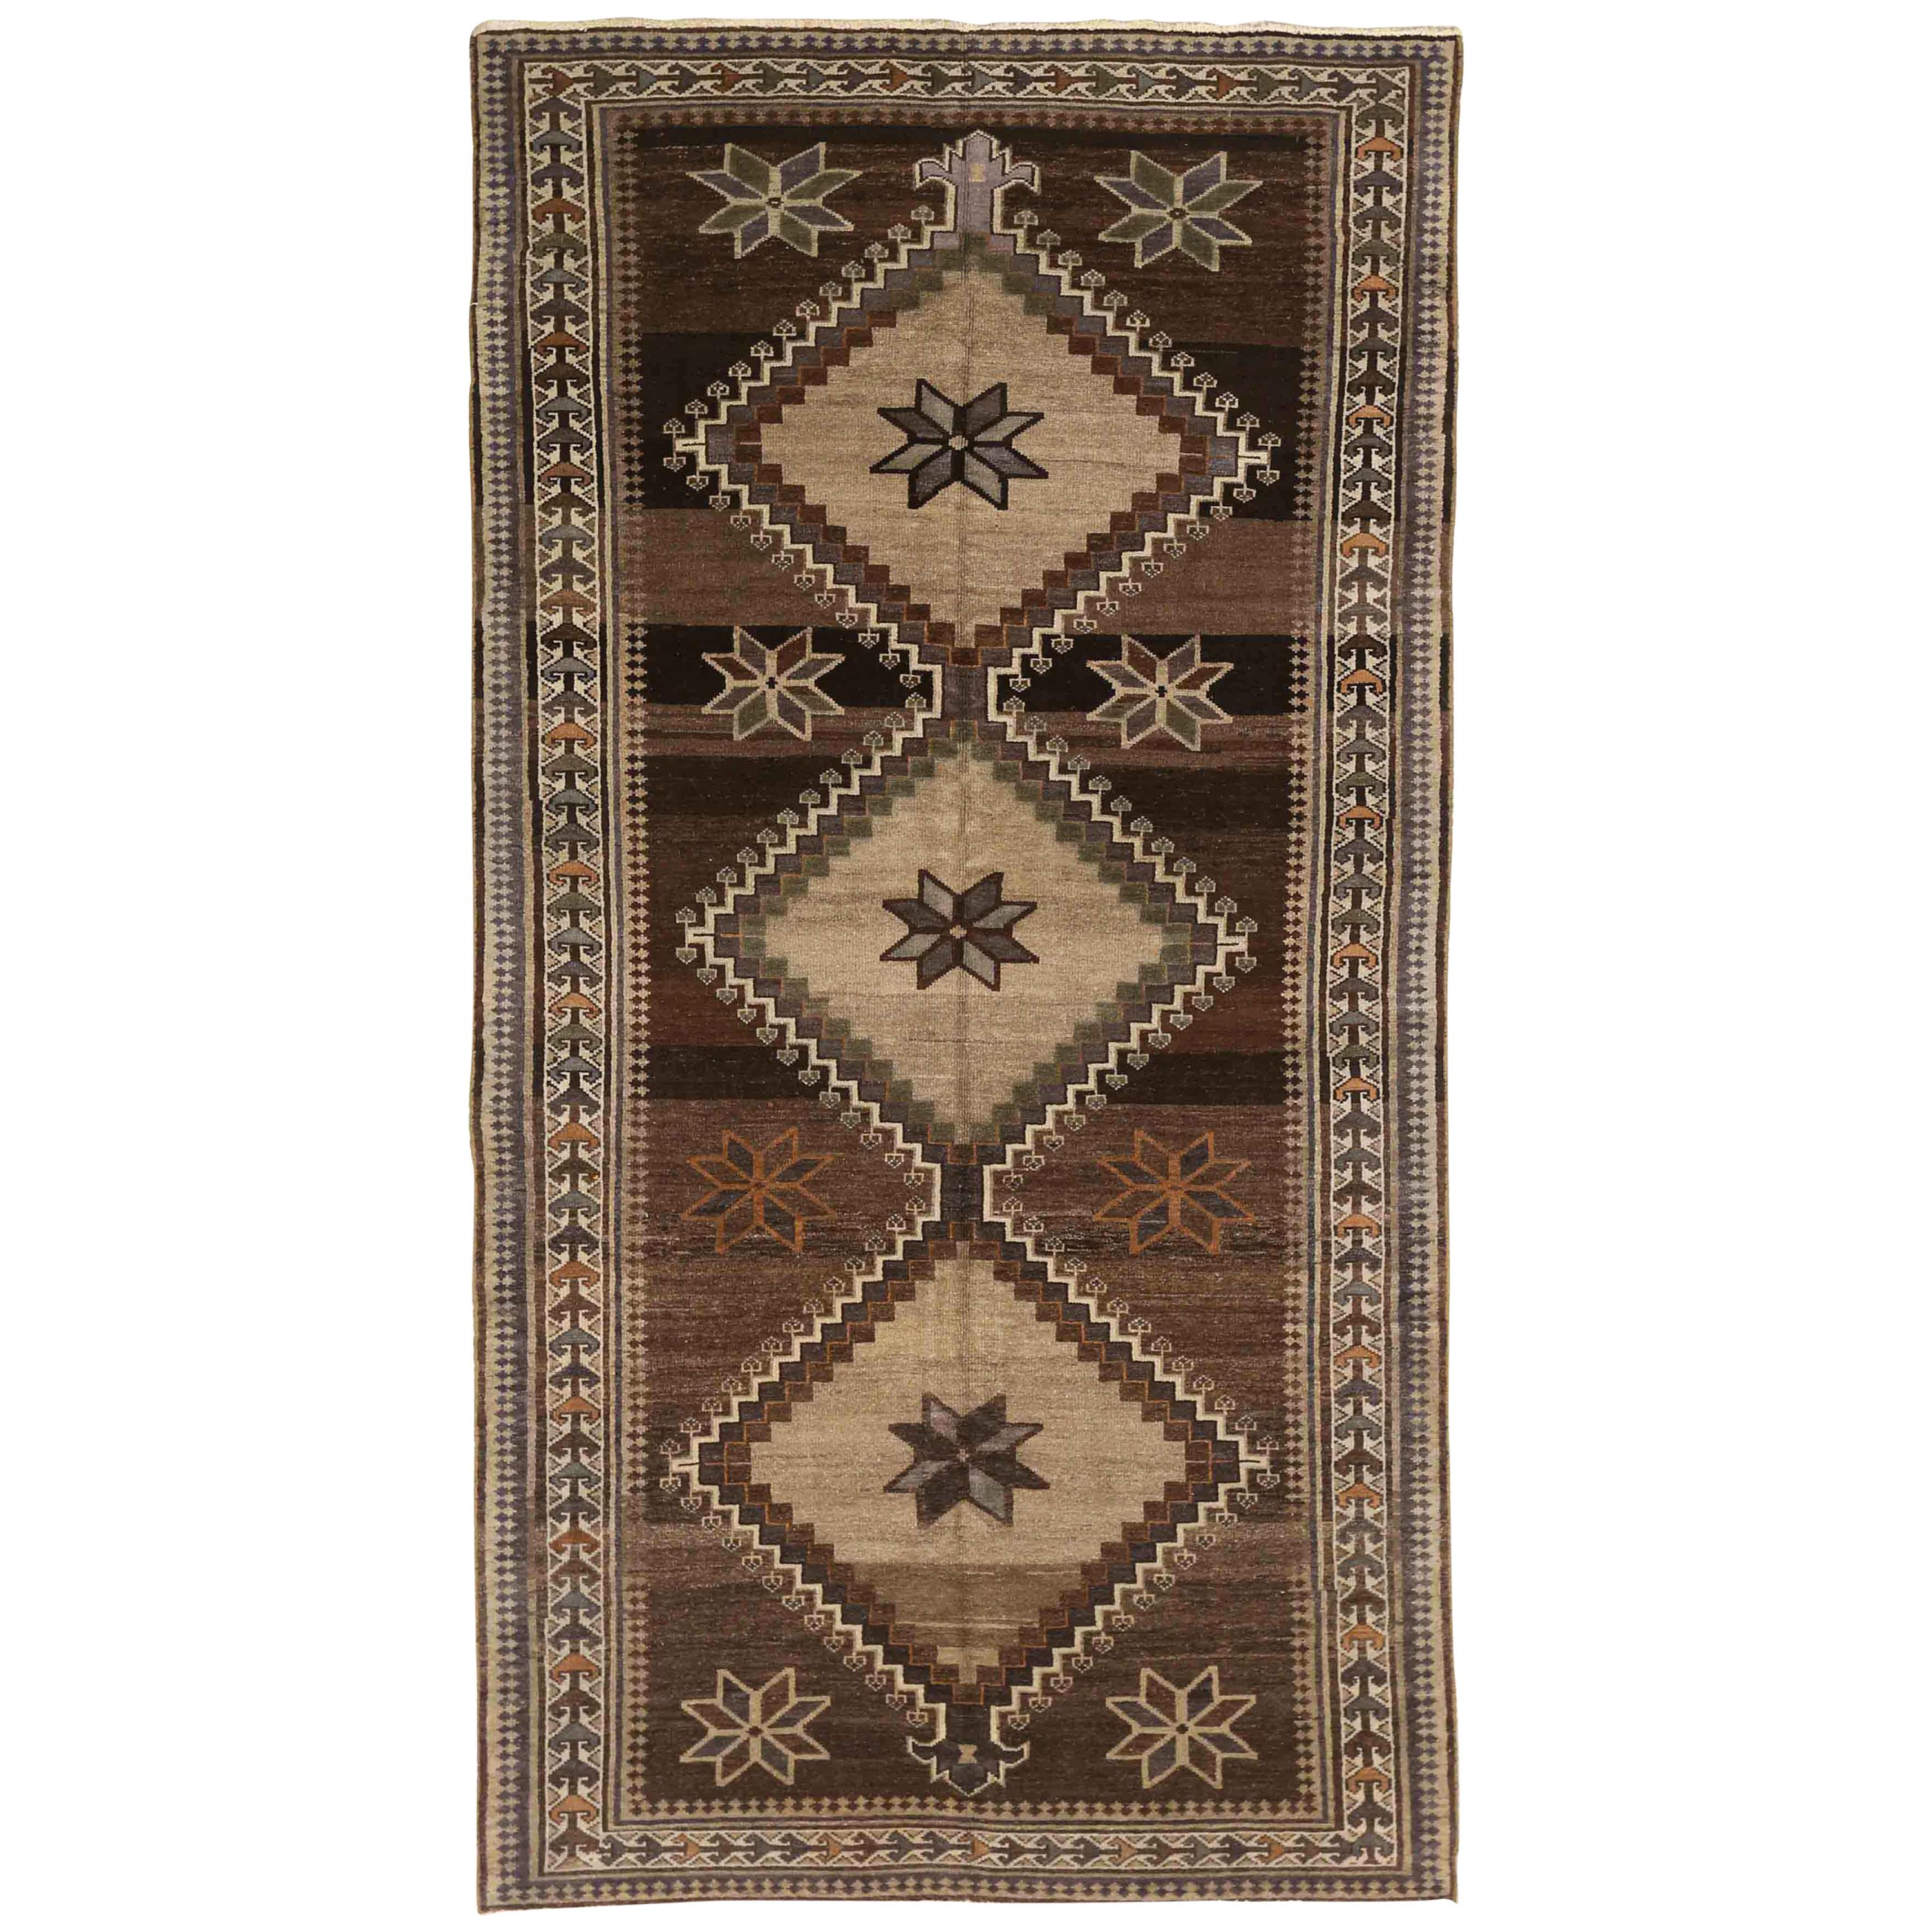 Antique Persian Malayer Rug with Black and Gray Floral Medallions on Beige Field For Sale